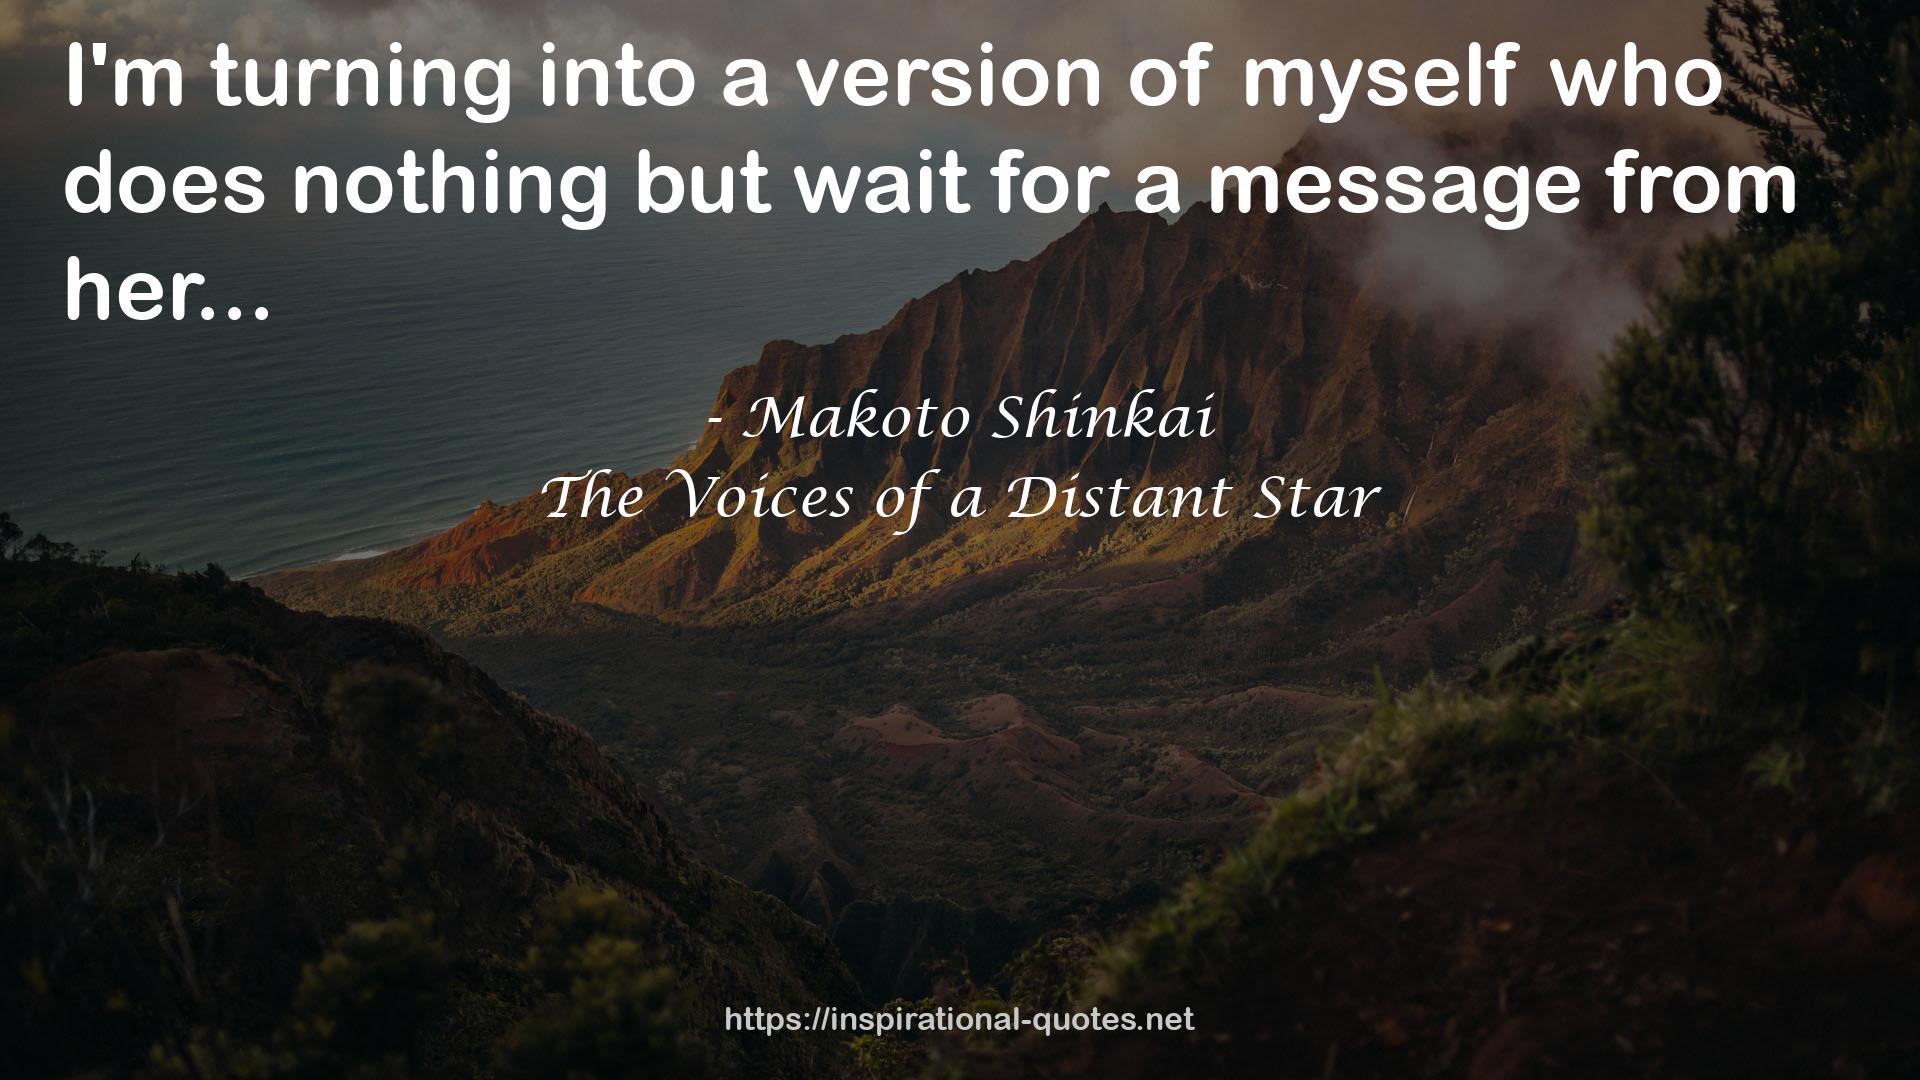 The Voices of a Distant Star QUOTES